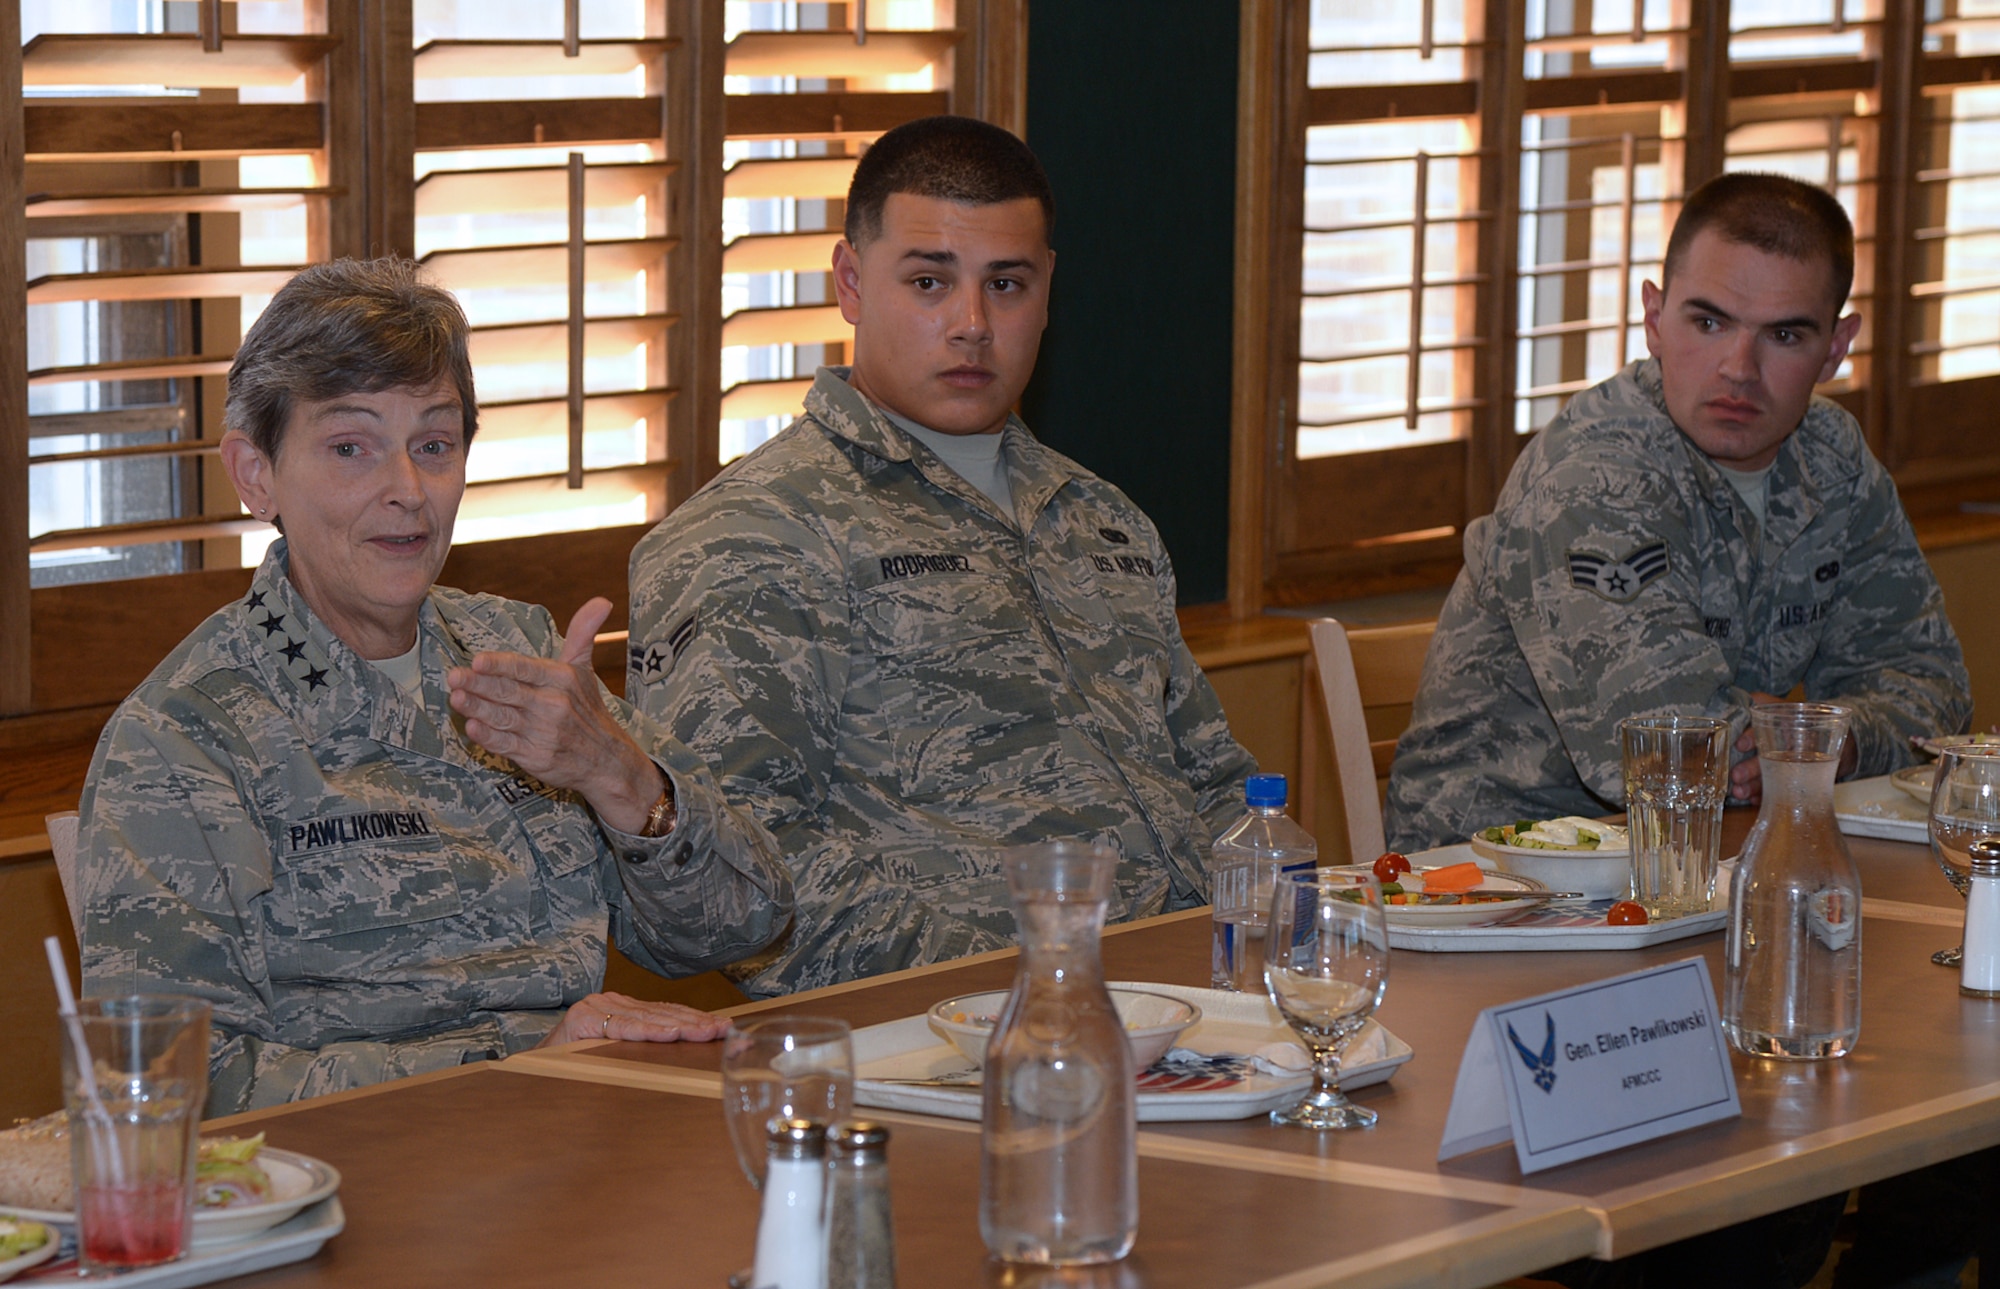 Gen. Ellen M. Pawlikowski, Air Force Materiel Command commander, talks with Team Hill Airmen during lunch at Hill Air Force Base, Utah, Aug. 6. During remarks after the meal, Pawlikowski emphasized the importance of resiliency and lauded Team Hill’s Total Force integration. She also answered Airmen’s questions and thanked them for their service and commitment. Also appearing in the photo are Airman 1st Class Steven Rodriguez, 75th Security Forces Squadron, and Senior Airman Ryan Hammond, 309th Aircraft Maintenance Group. (U.S. Air Force photo by Alex R. Lloyd)

